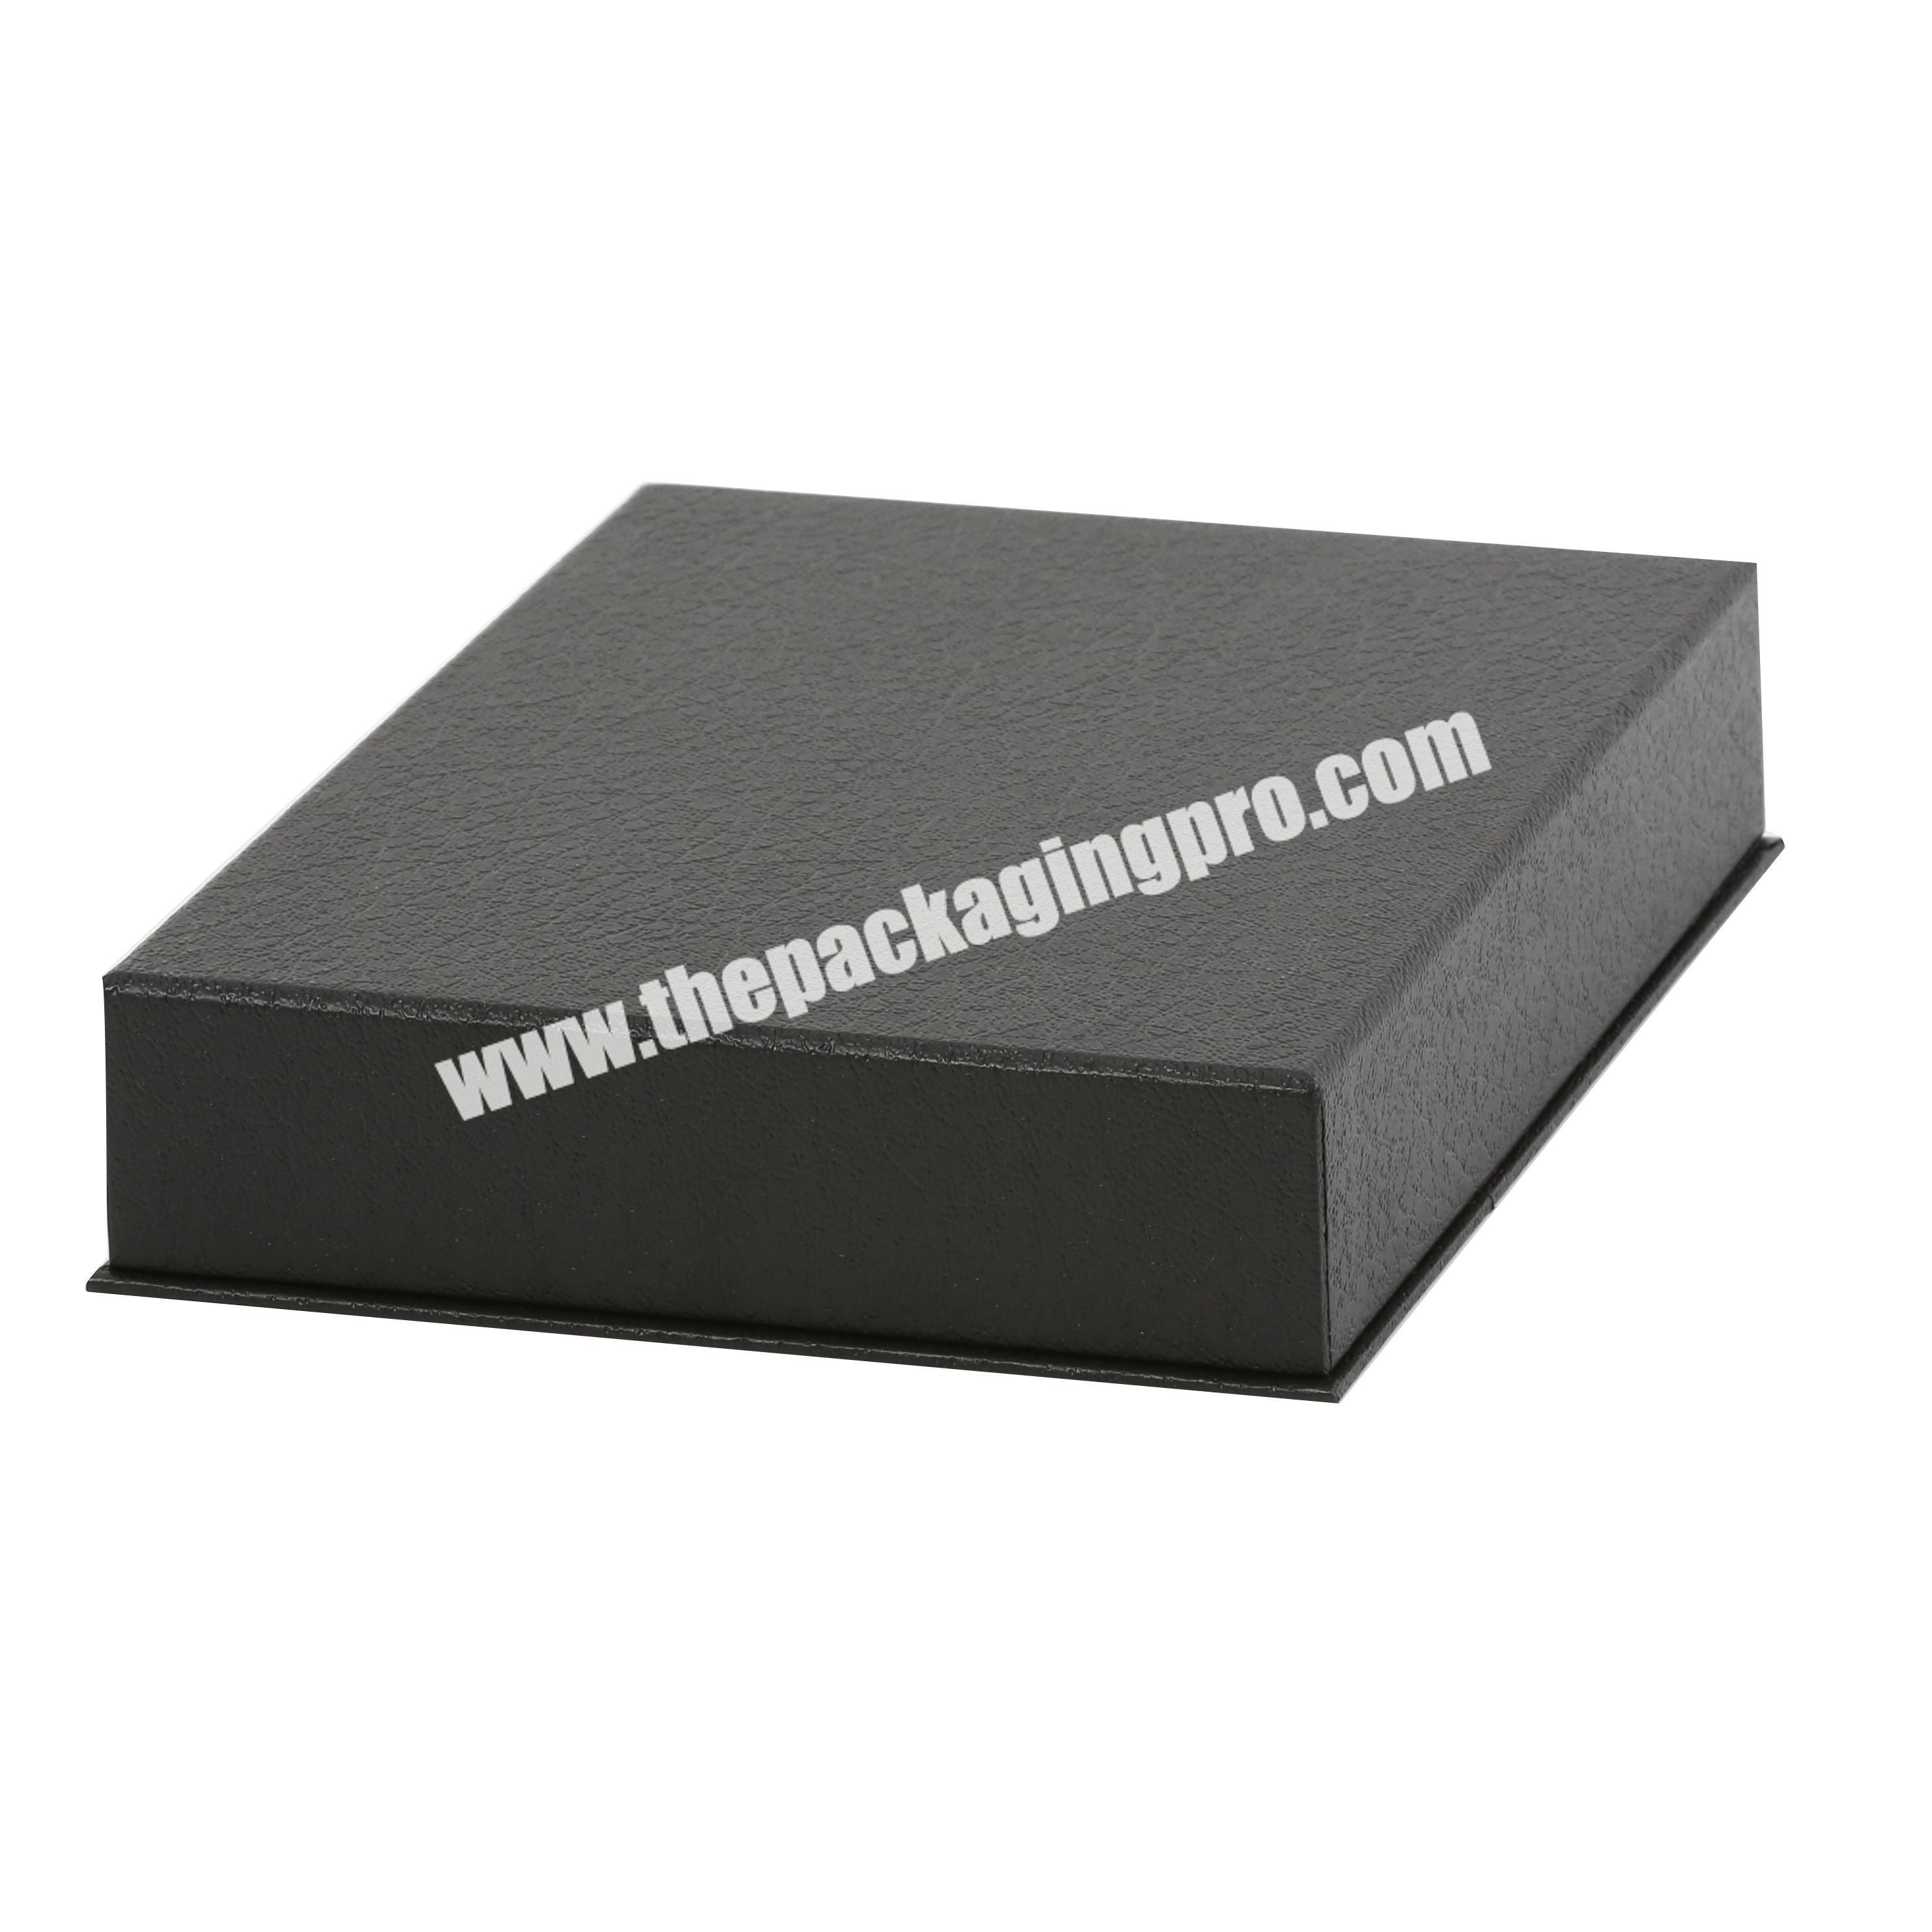 Shop decorate fake book shape gift box with magnetic closure made by China packaging factory